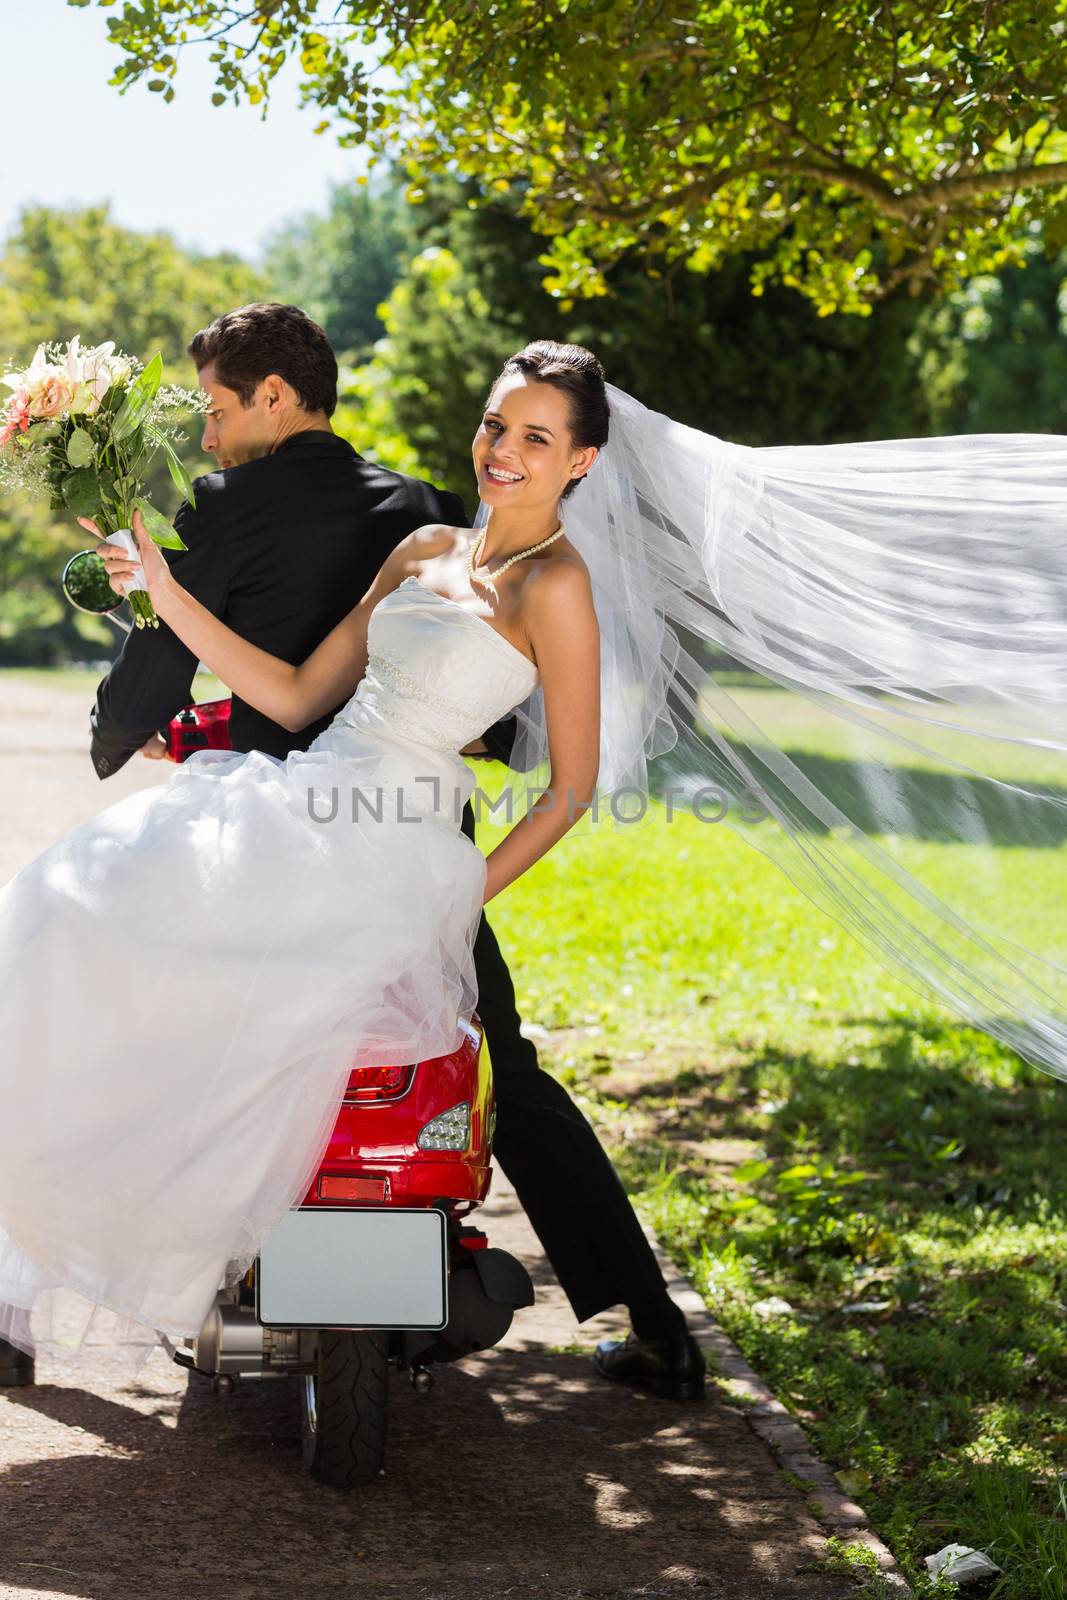 Full length of a newlywed couple sitting on scooter in the park